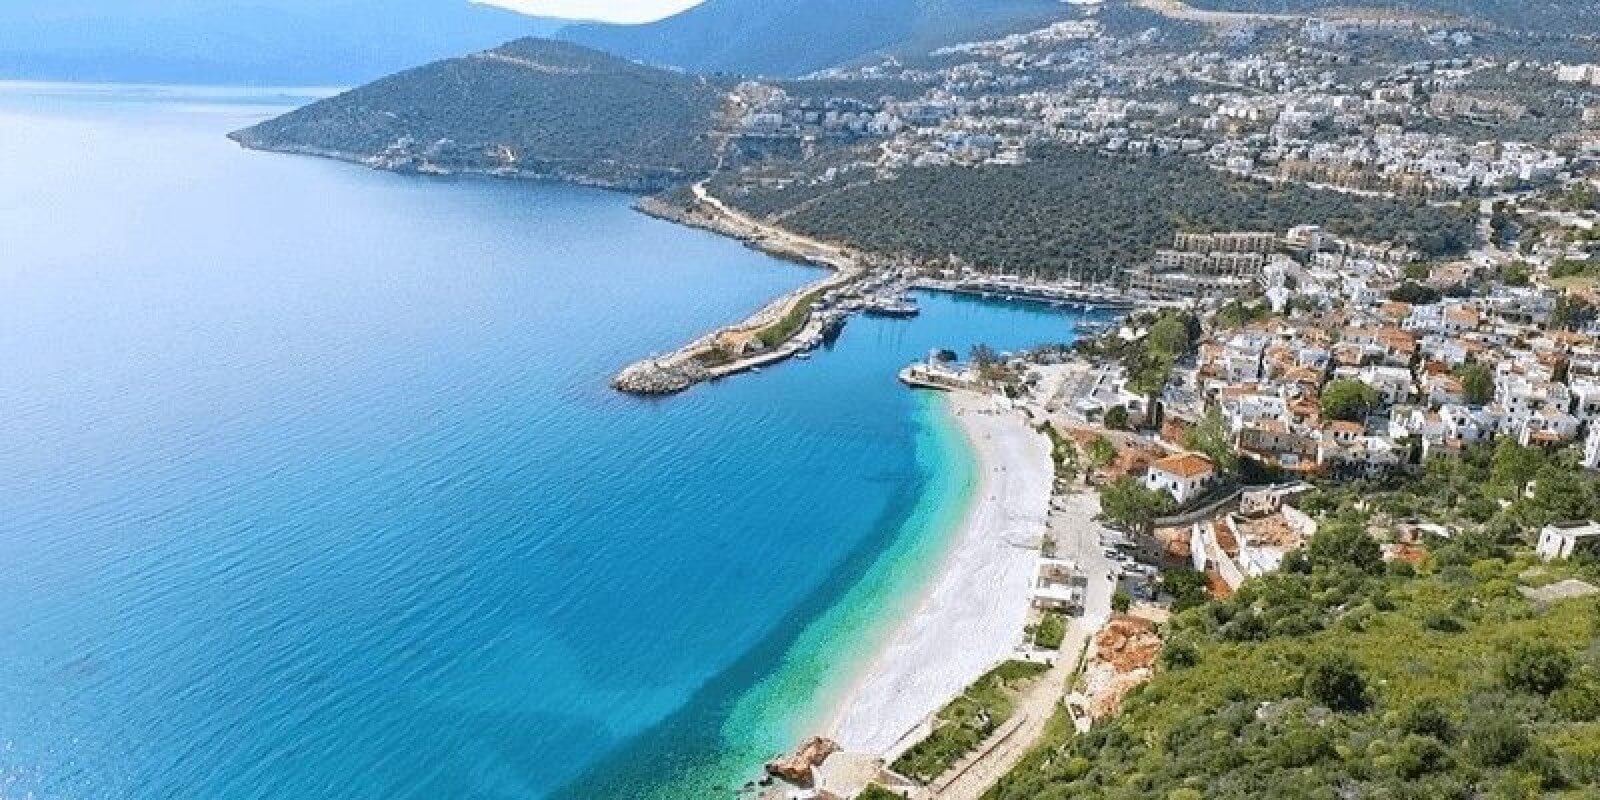 Places to Visit in Kalkan